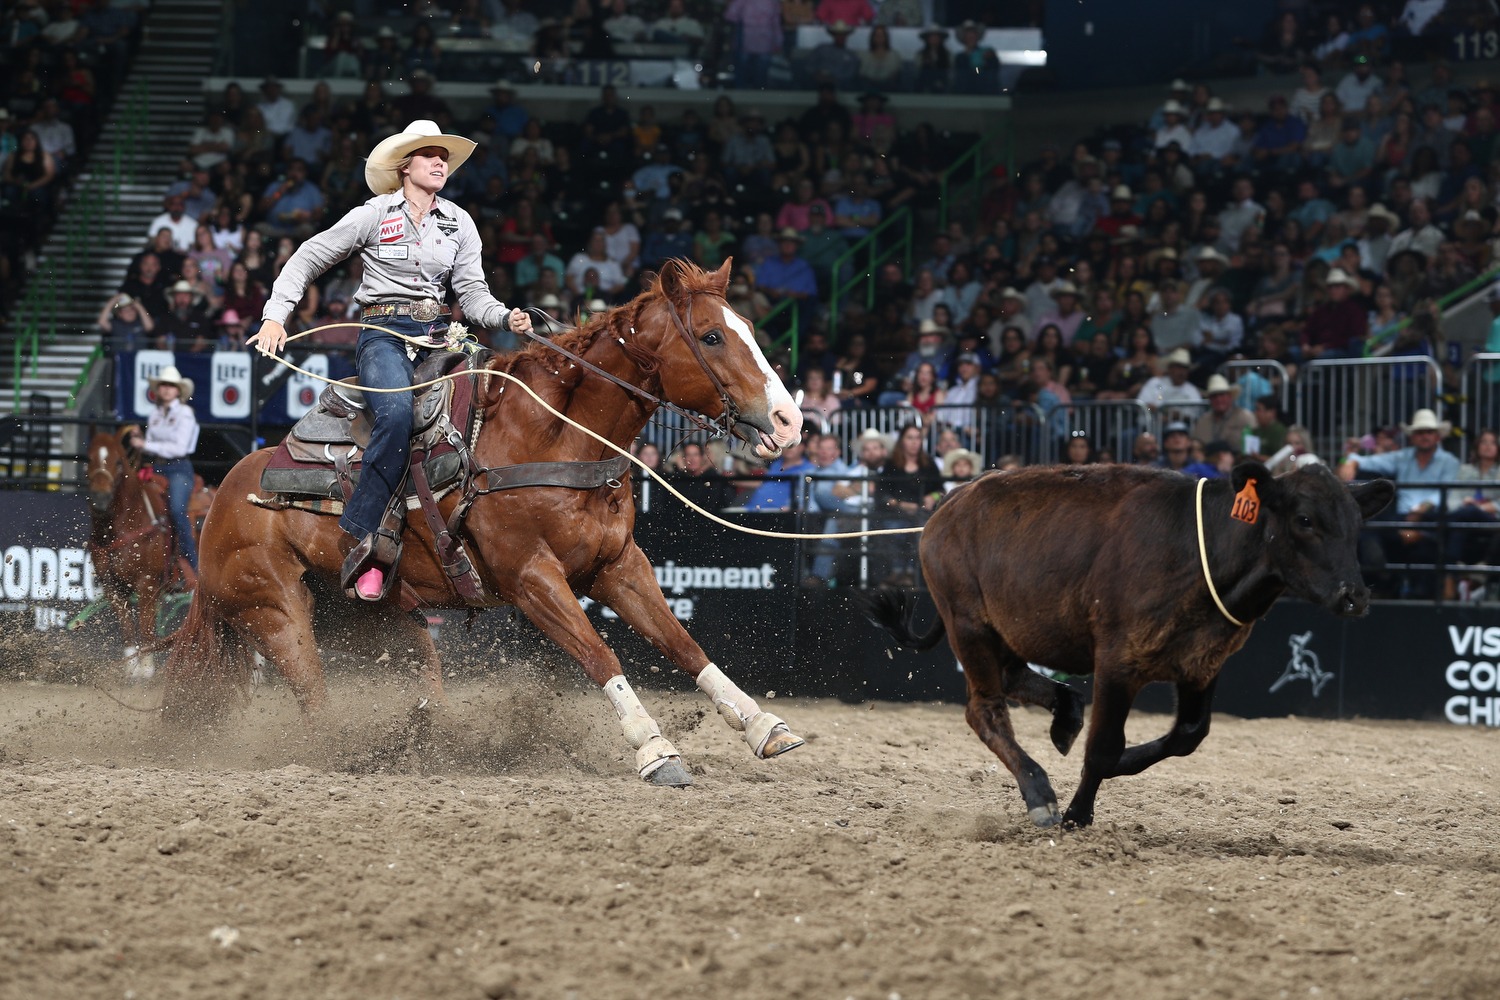 Rodeo Corpus Christi Hosts The First Stop Of 2023 Triple Crown Of Rodeo